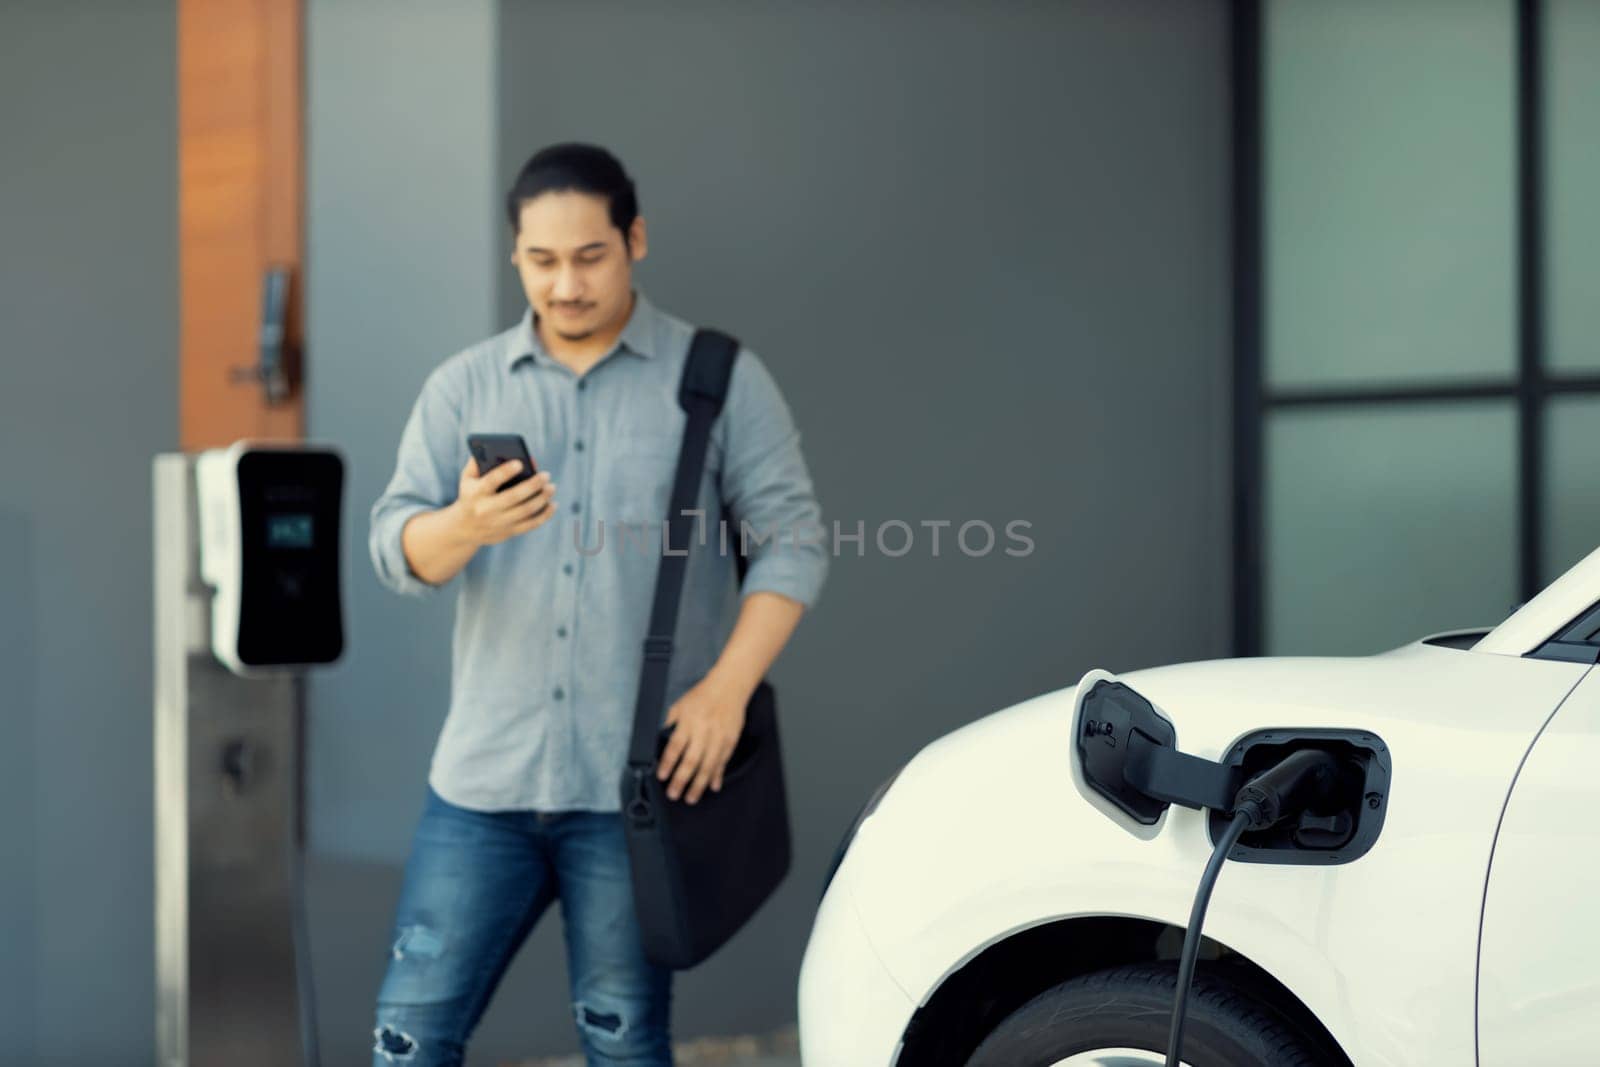 Progressive asian man and electric car with home charging station. Concept of the use of electric vehicles in a progressive lifestyle contributes to a clean and healthy environment.